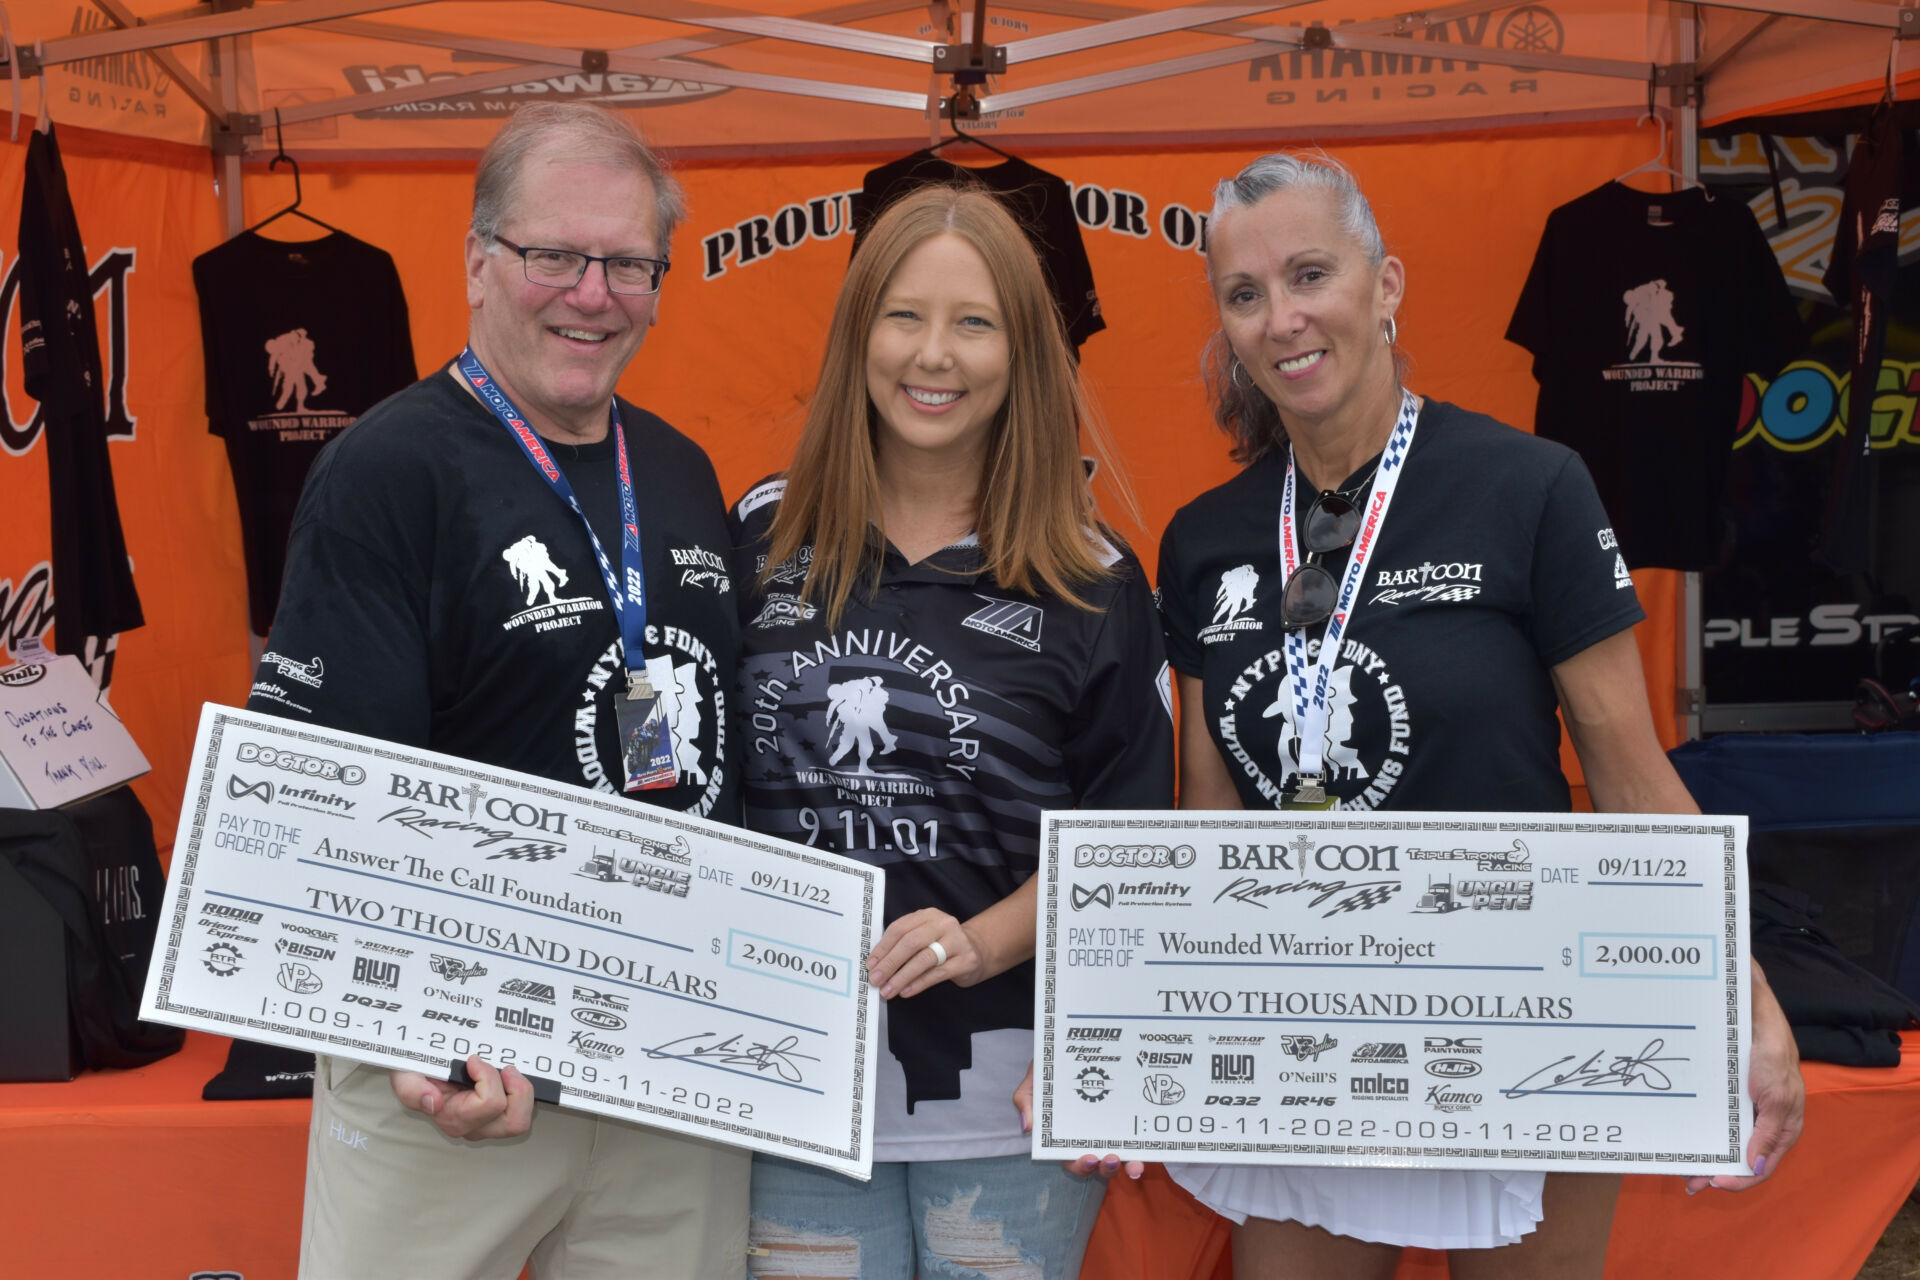 Tosha Lackey (center) accepts checks on behalf of both The Wounded Warrior Project and Answer the Call Foundation from Dr. Mark 